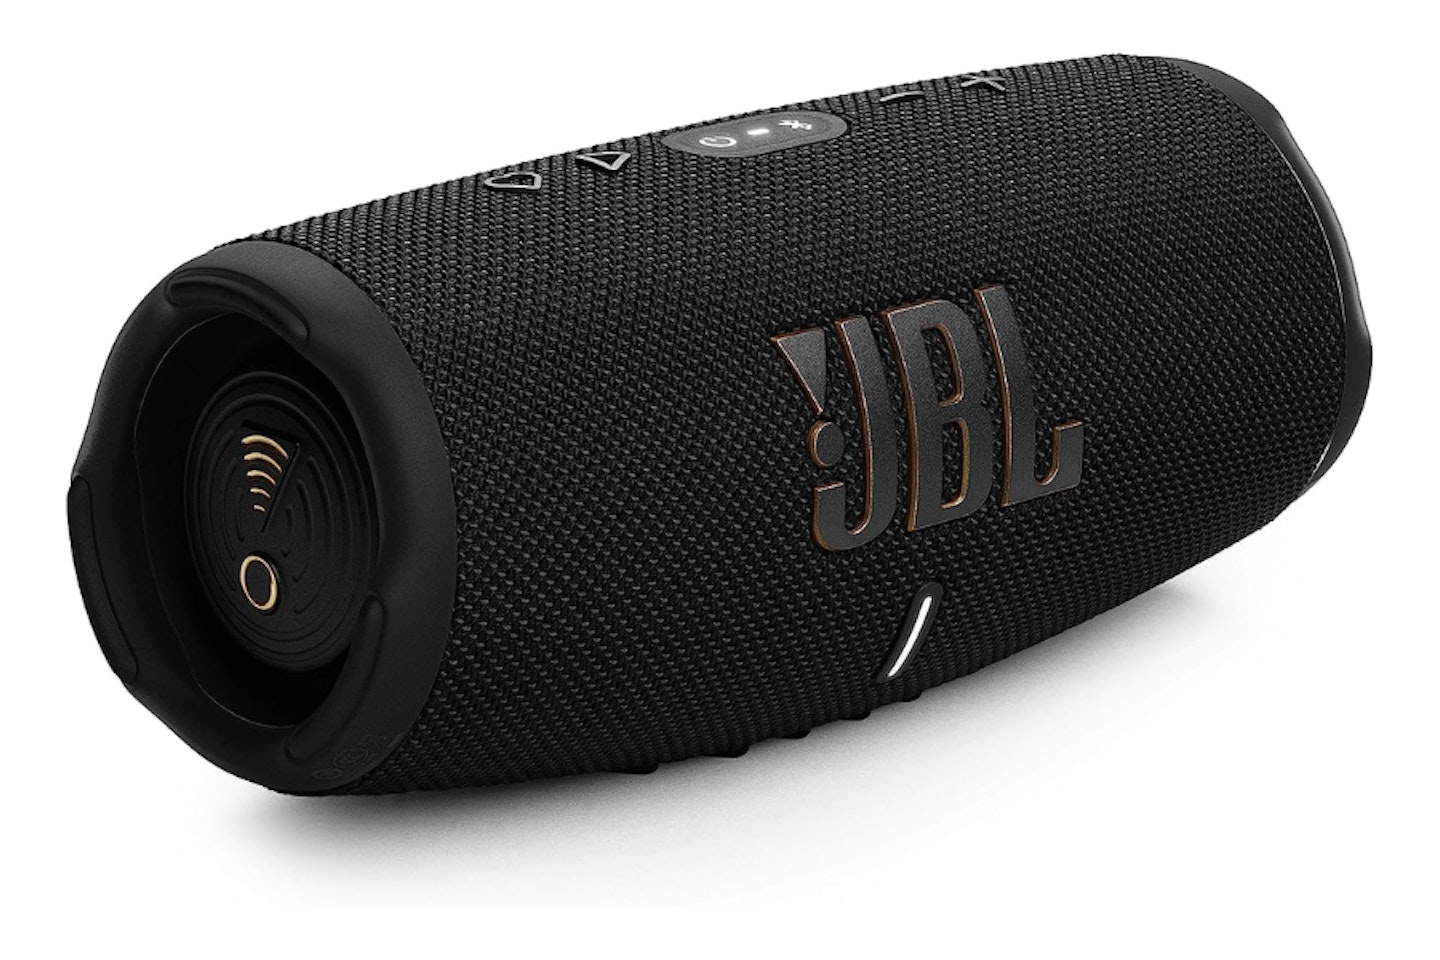 JBL CHARGE 5 - one of the best garden speakers